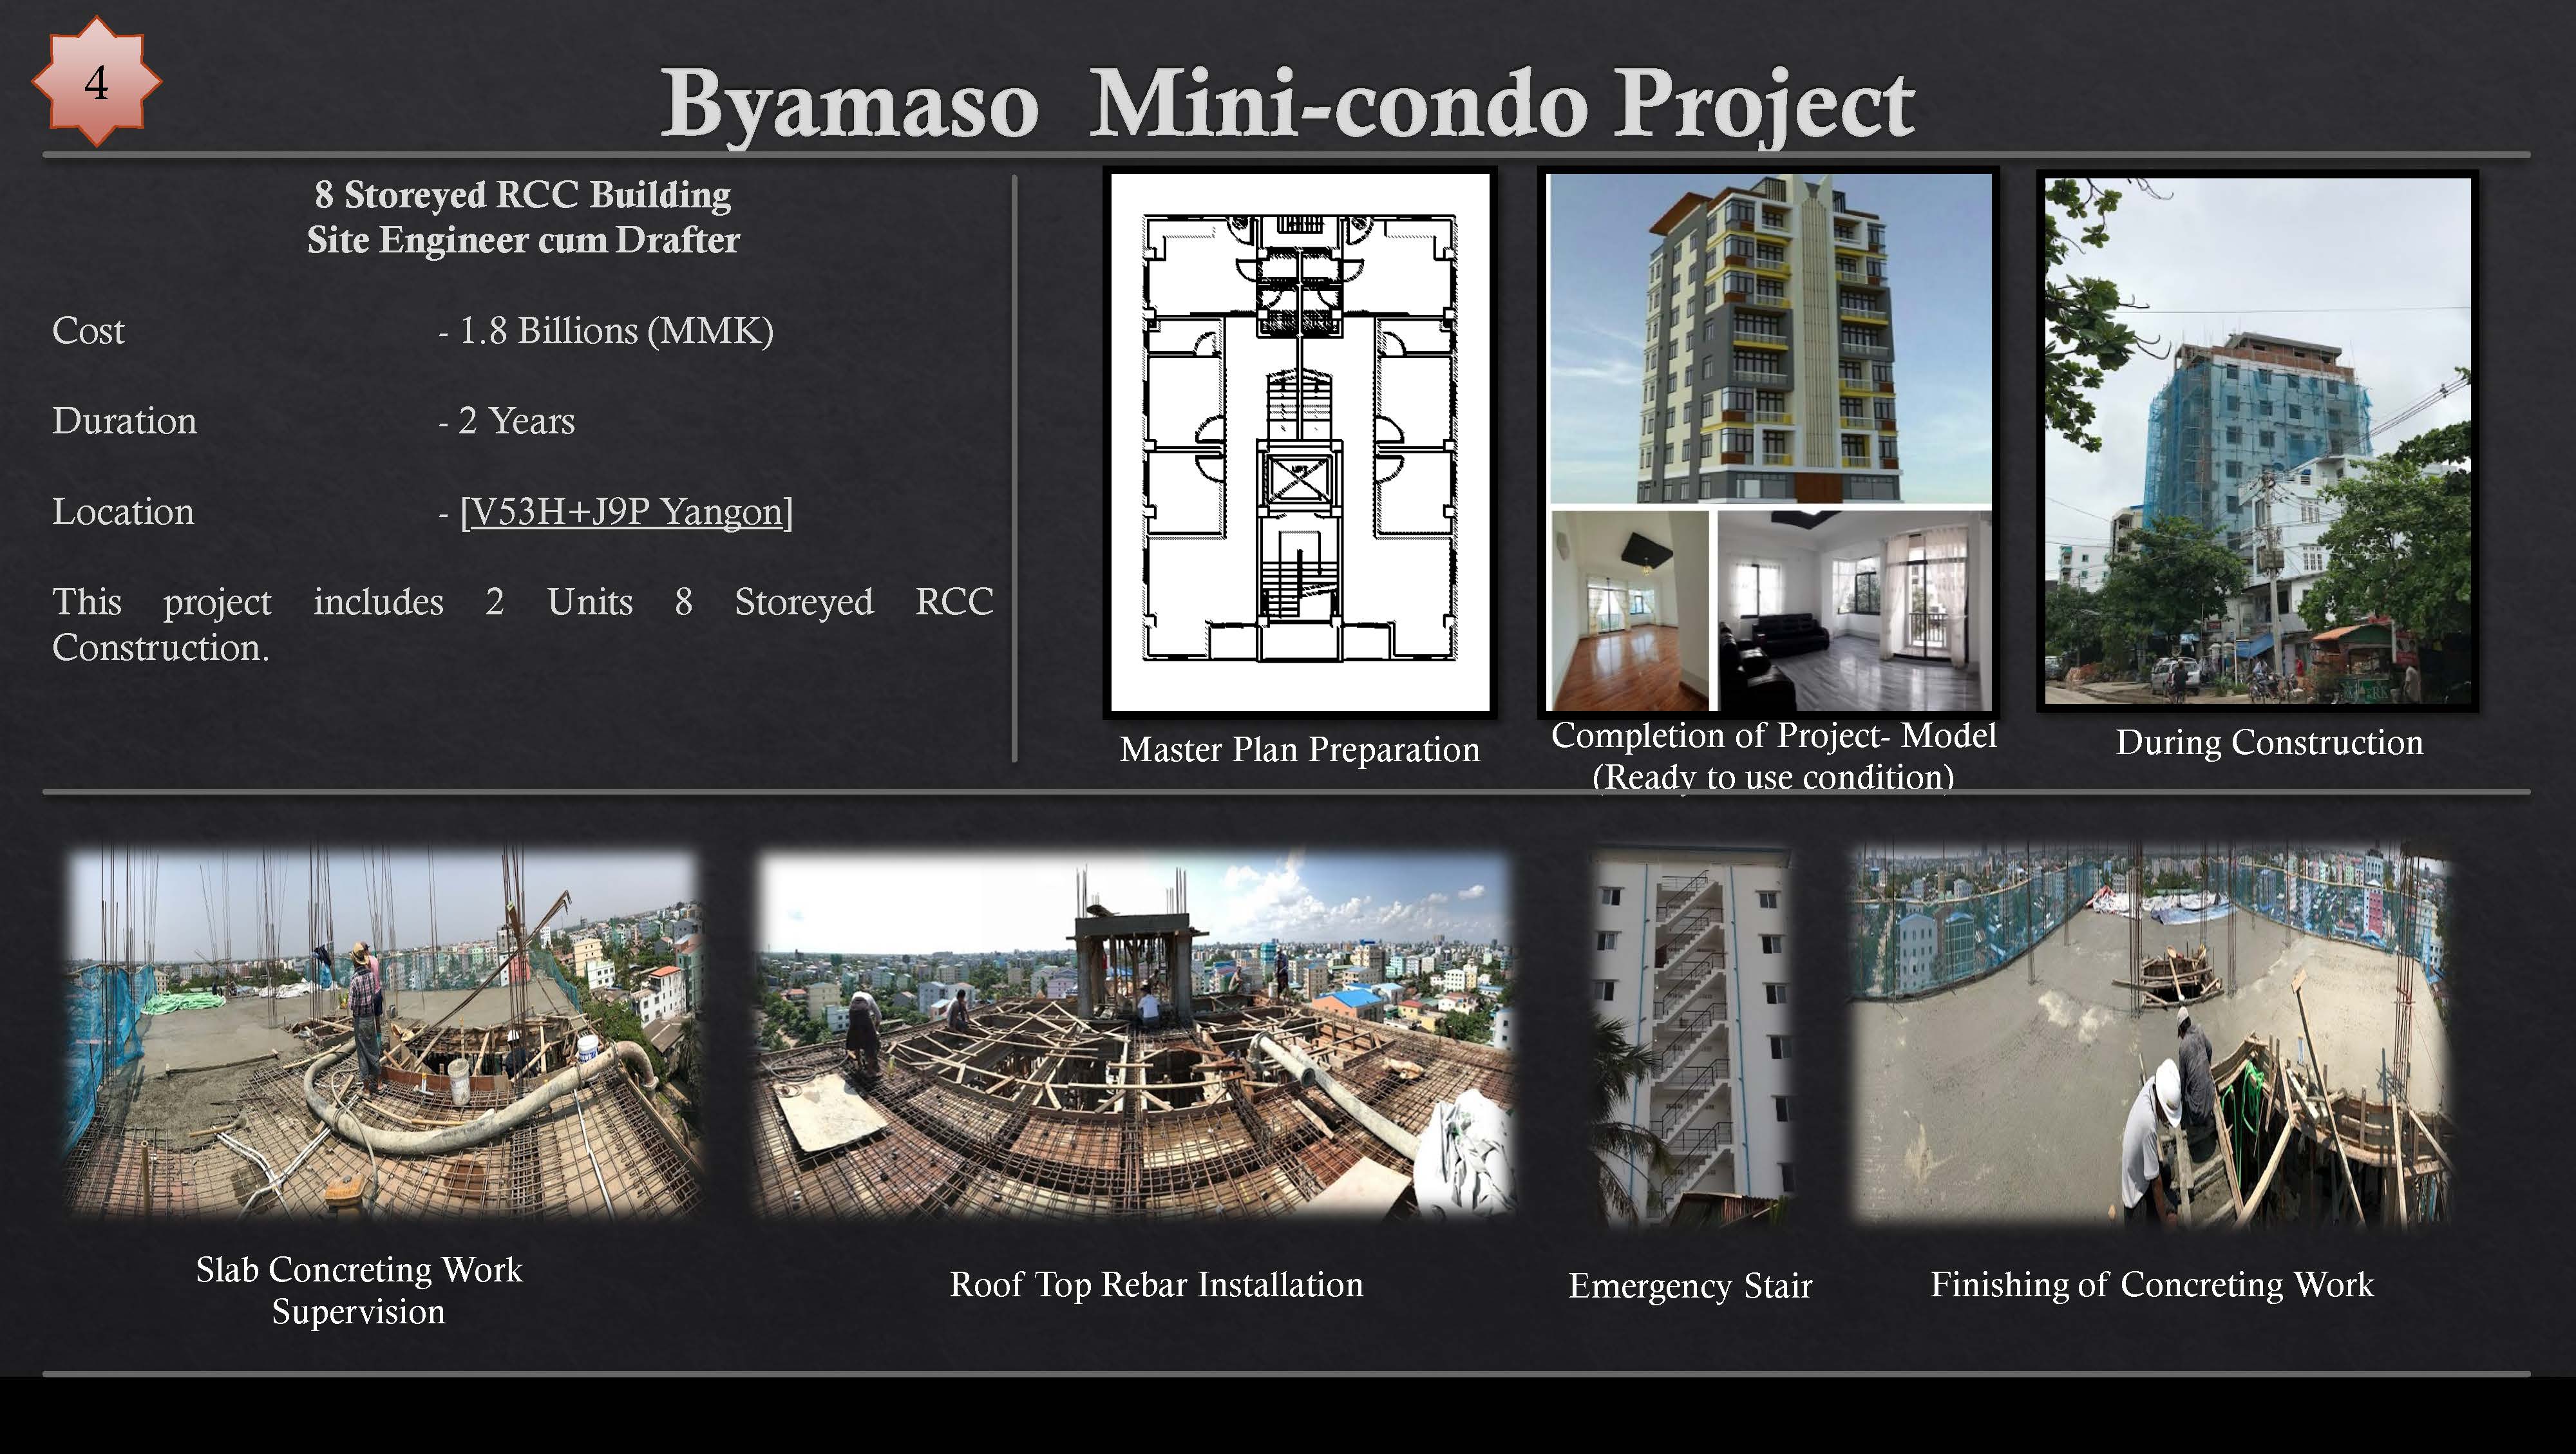 Byamaso Mini-condo Project

   

A pr EE Aix
Cost - 1.8 Billions (MMK) an—s WM iE
Duration - 2 Years
Location - [V53H+J9P Yangon]

This project includes 2 Units 8 Storeyed RCC
@fe) iN igileisle) ol

 

Ge

» 4 _ a ENN wl J
Completion of Project- Model BITS TIA @e Rs Ita aTe30
(Ready to use condition)

 

 

Slab Concreting Work
Supervision

Roof Top Rebar Installation Emergency Stair Finishing of Concreting Work